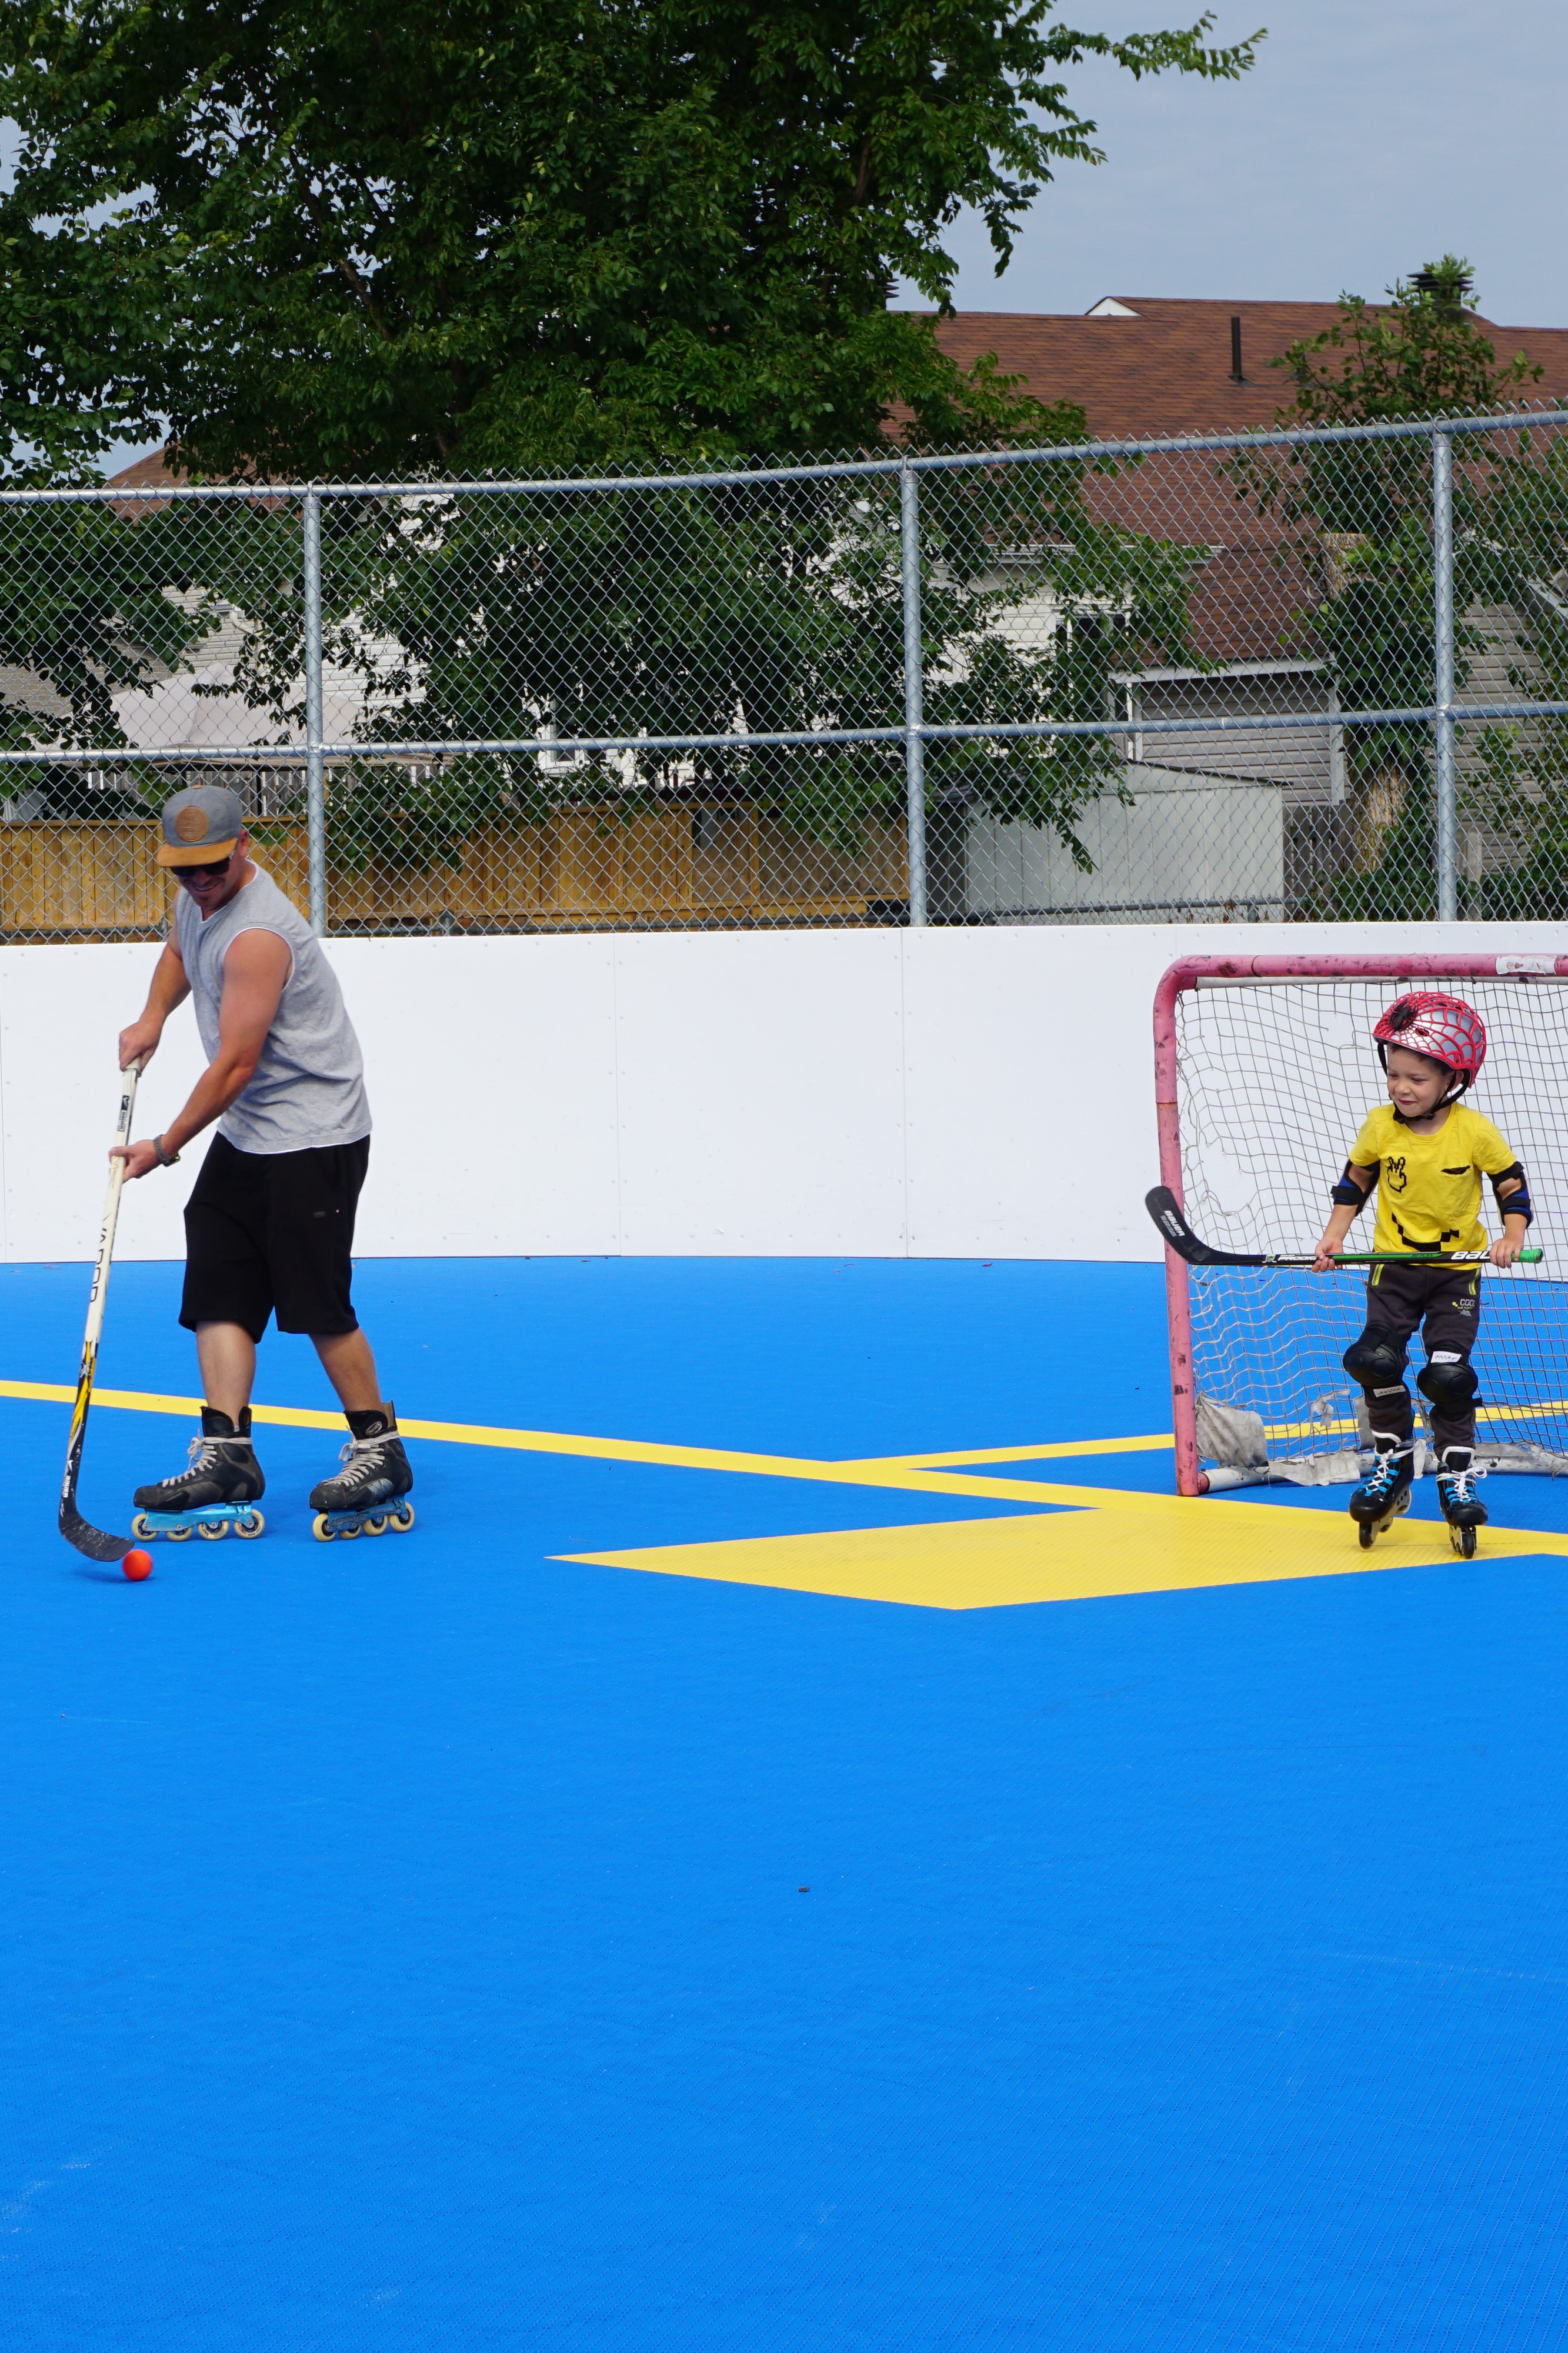 father and son playing dekhockey